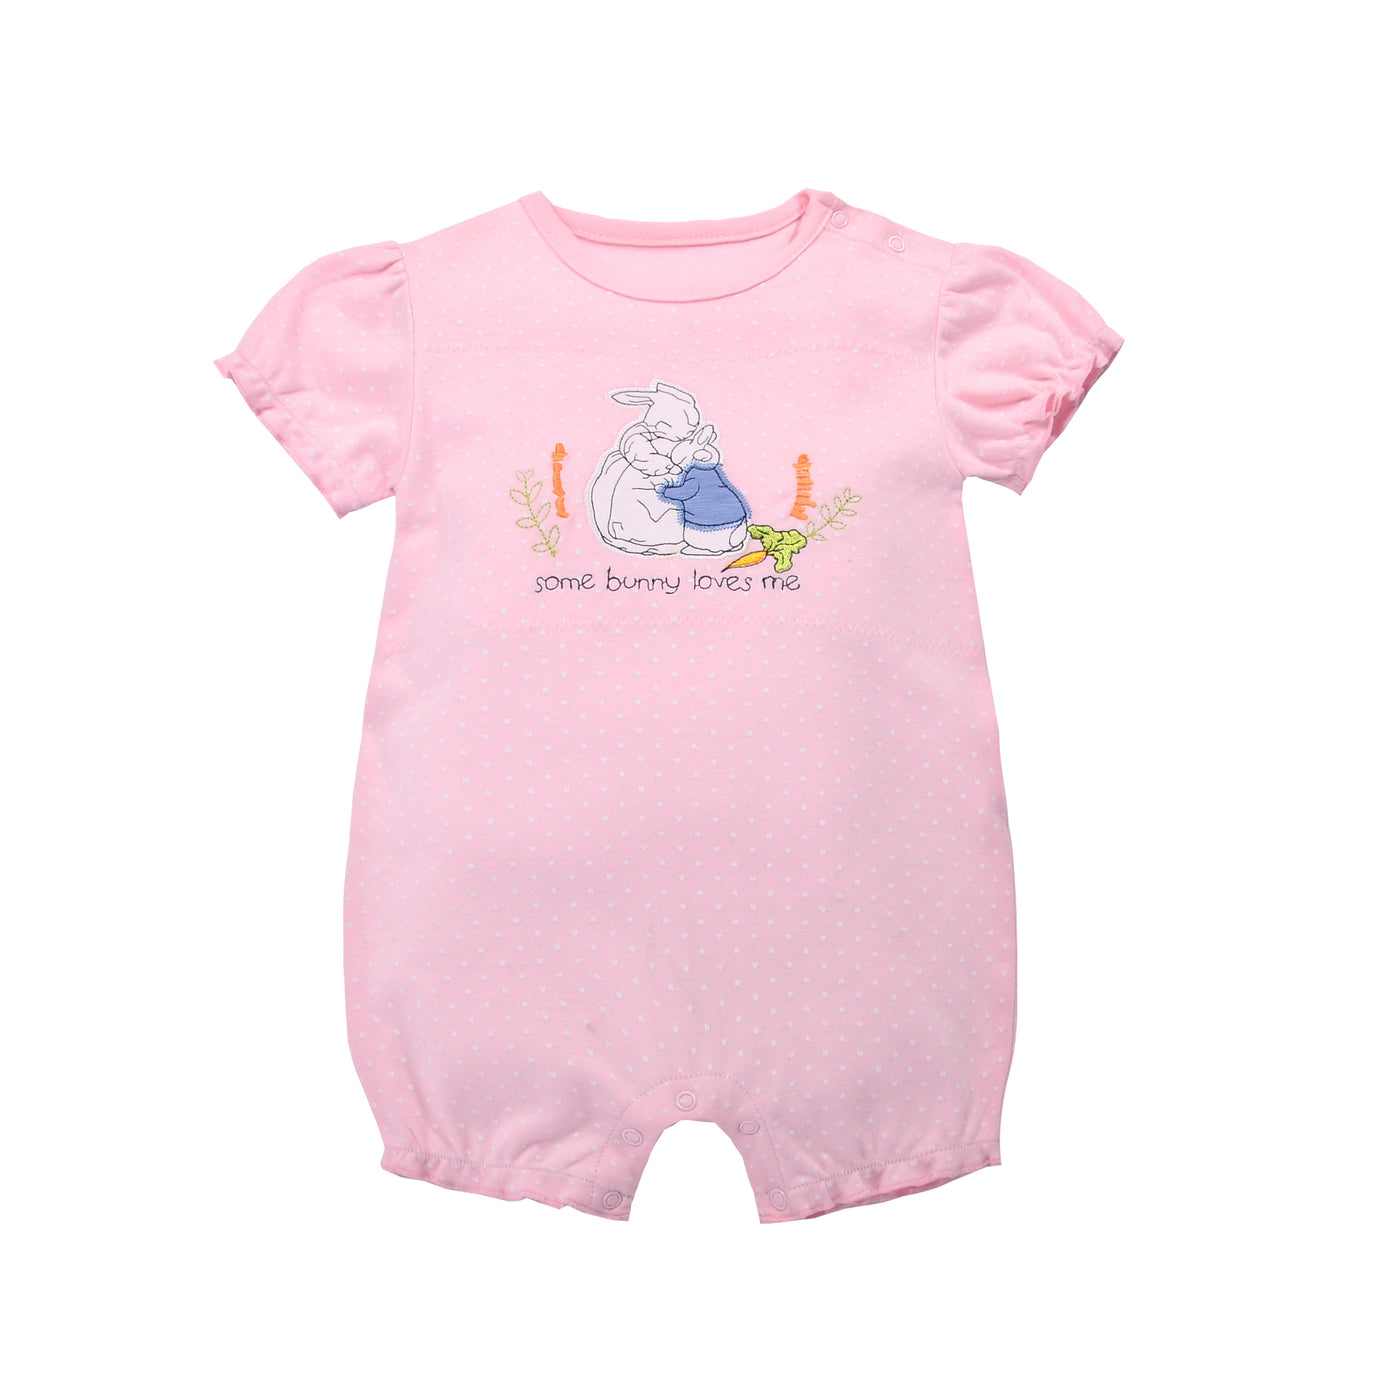 Baby Girl Romper Pink w Embroidered Rabbits - Little Kooma